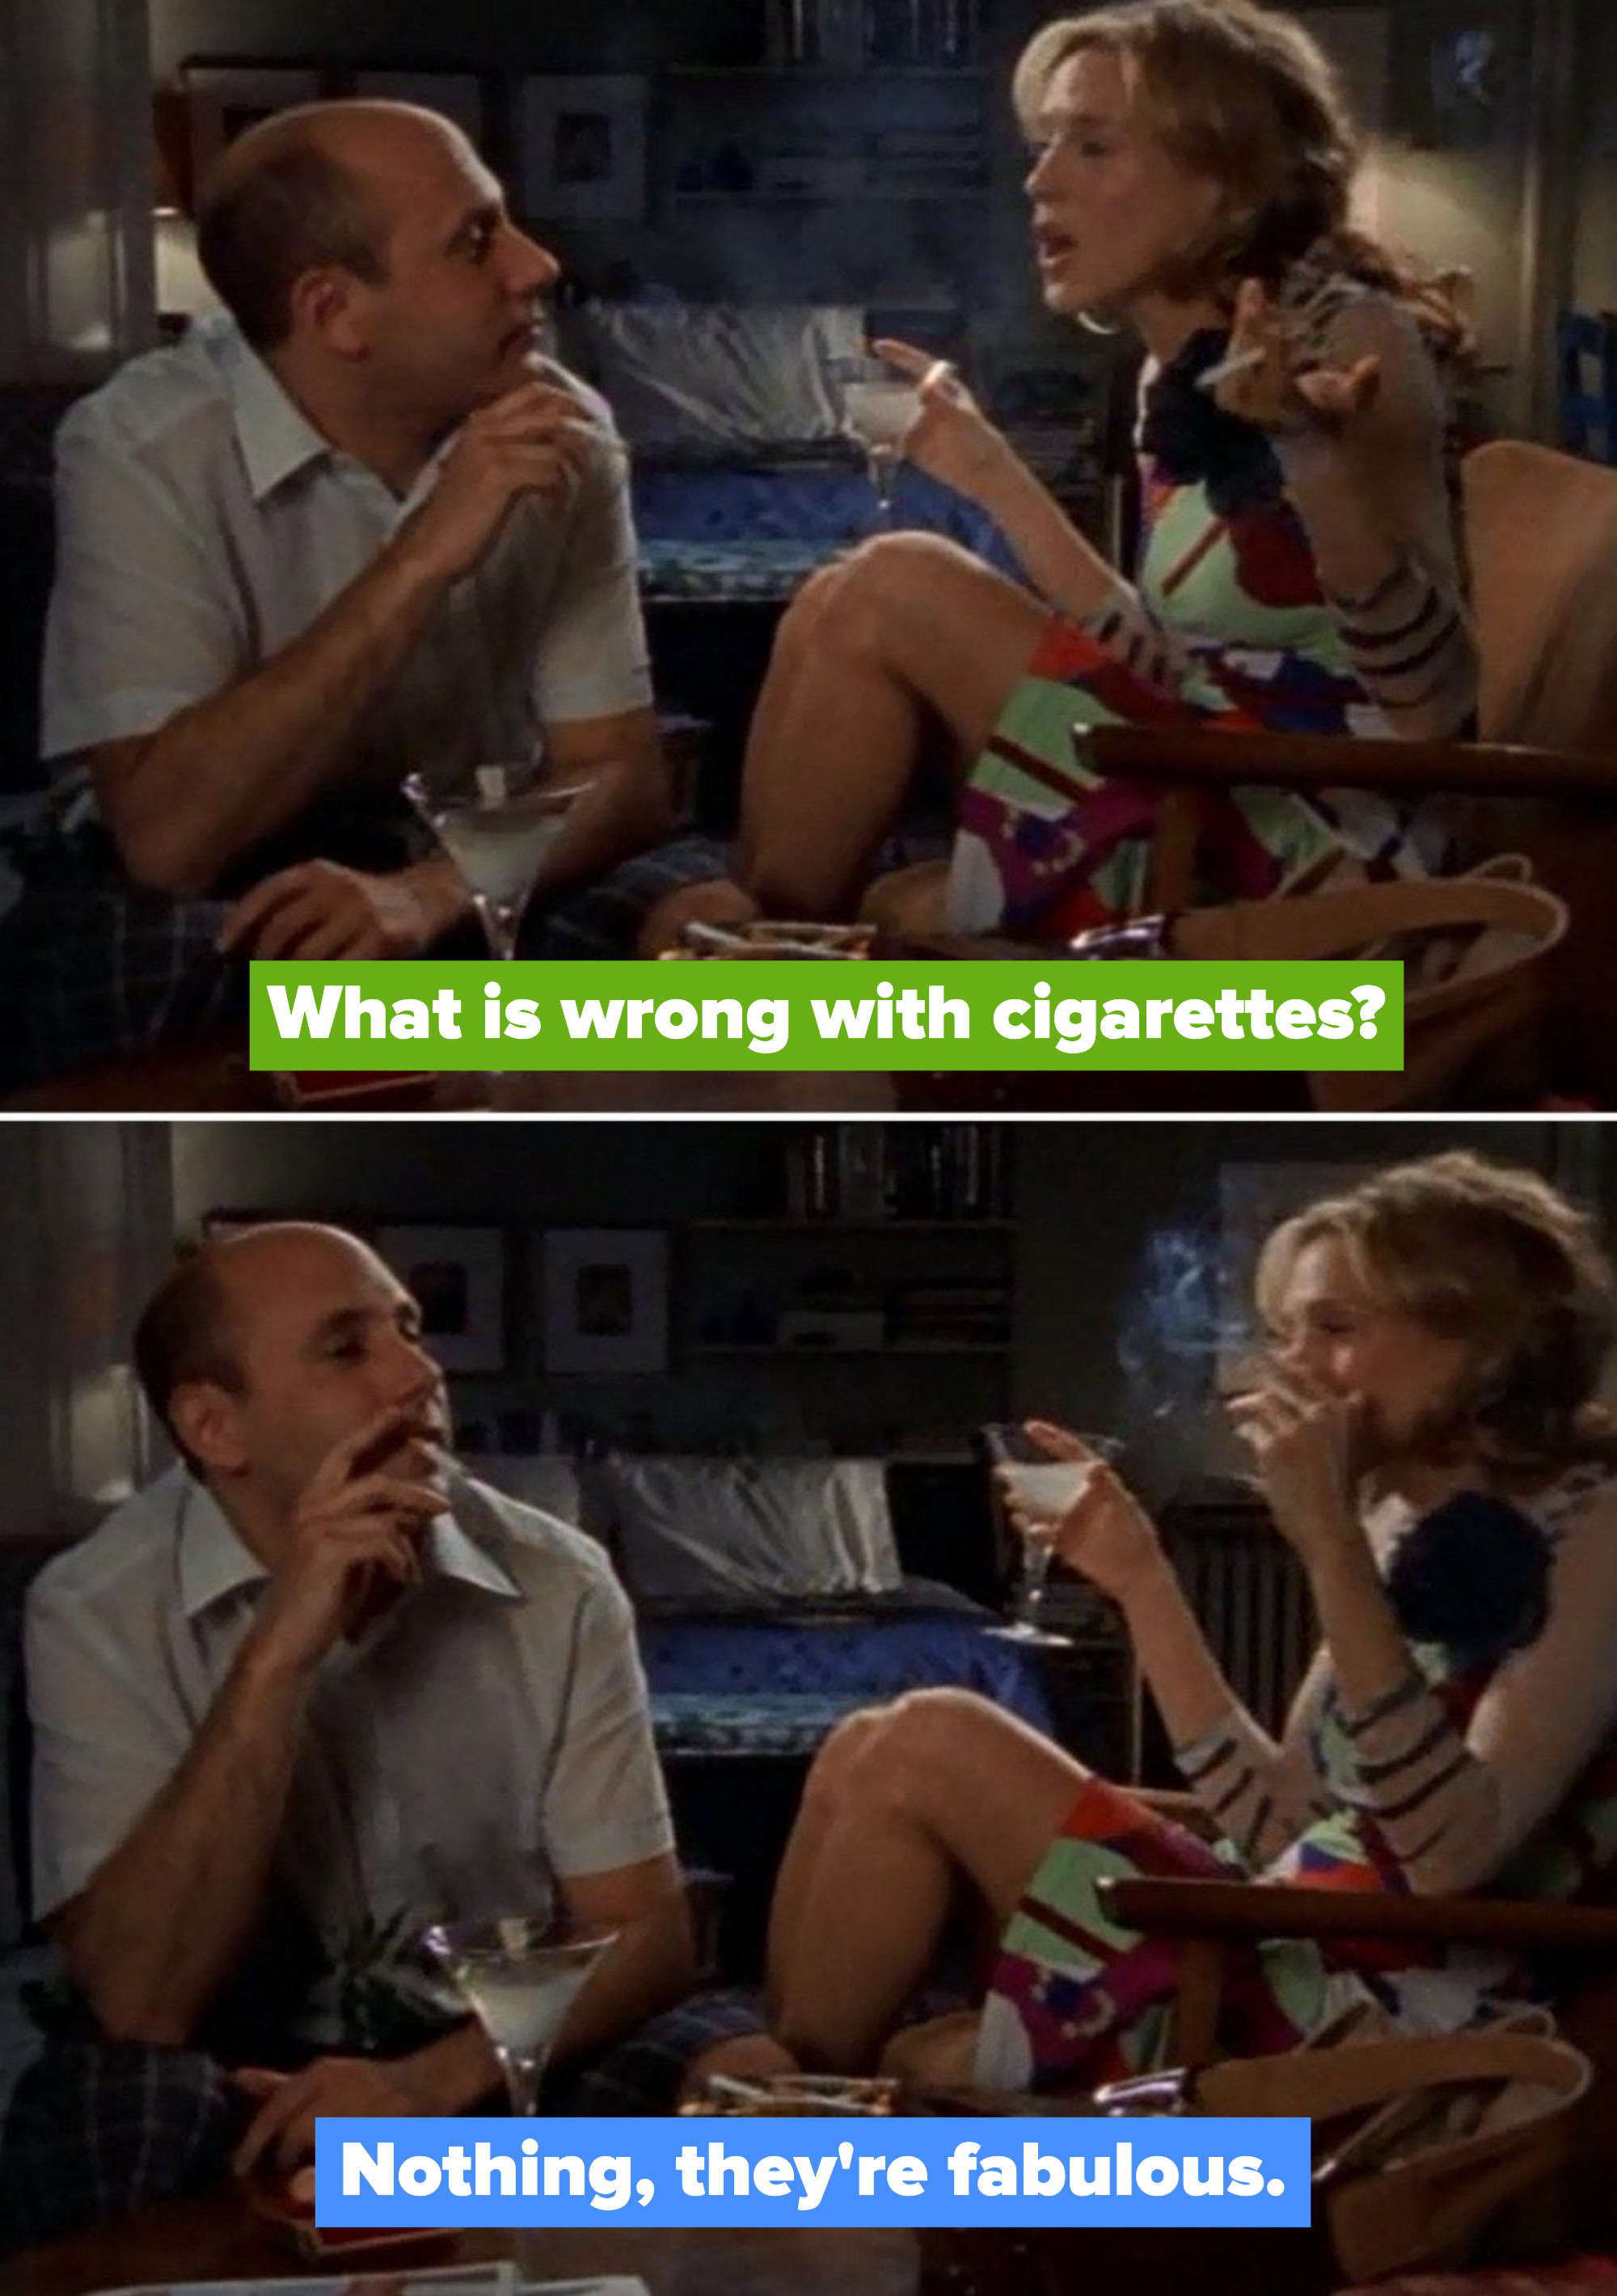 Carrie to Stanford: &quot;What is wrong with cigarettes?&quot; Stanford: &quot;Nothing, they&#x27;re fabulous&quot;